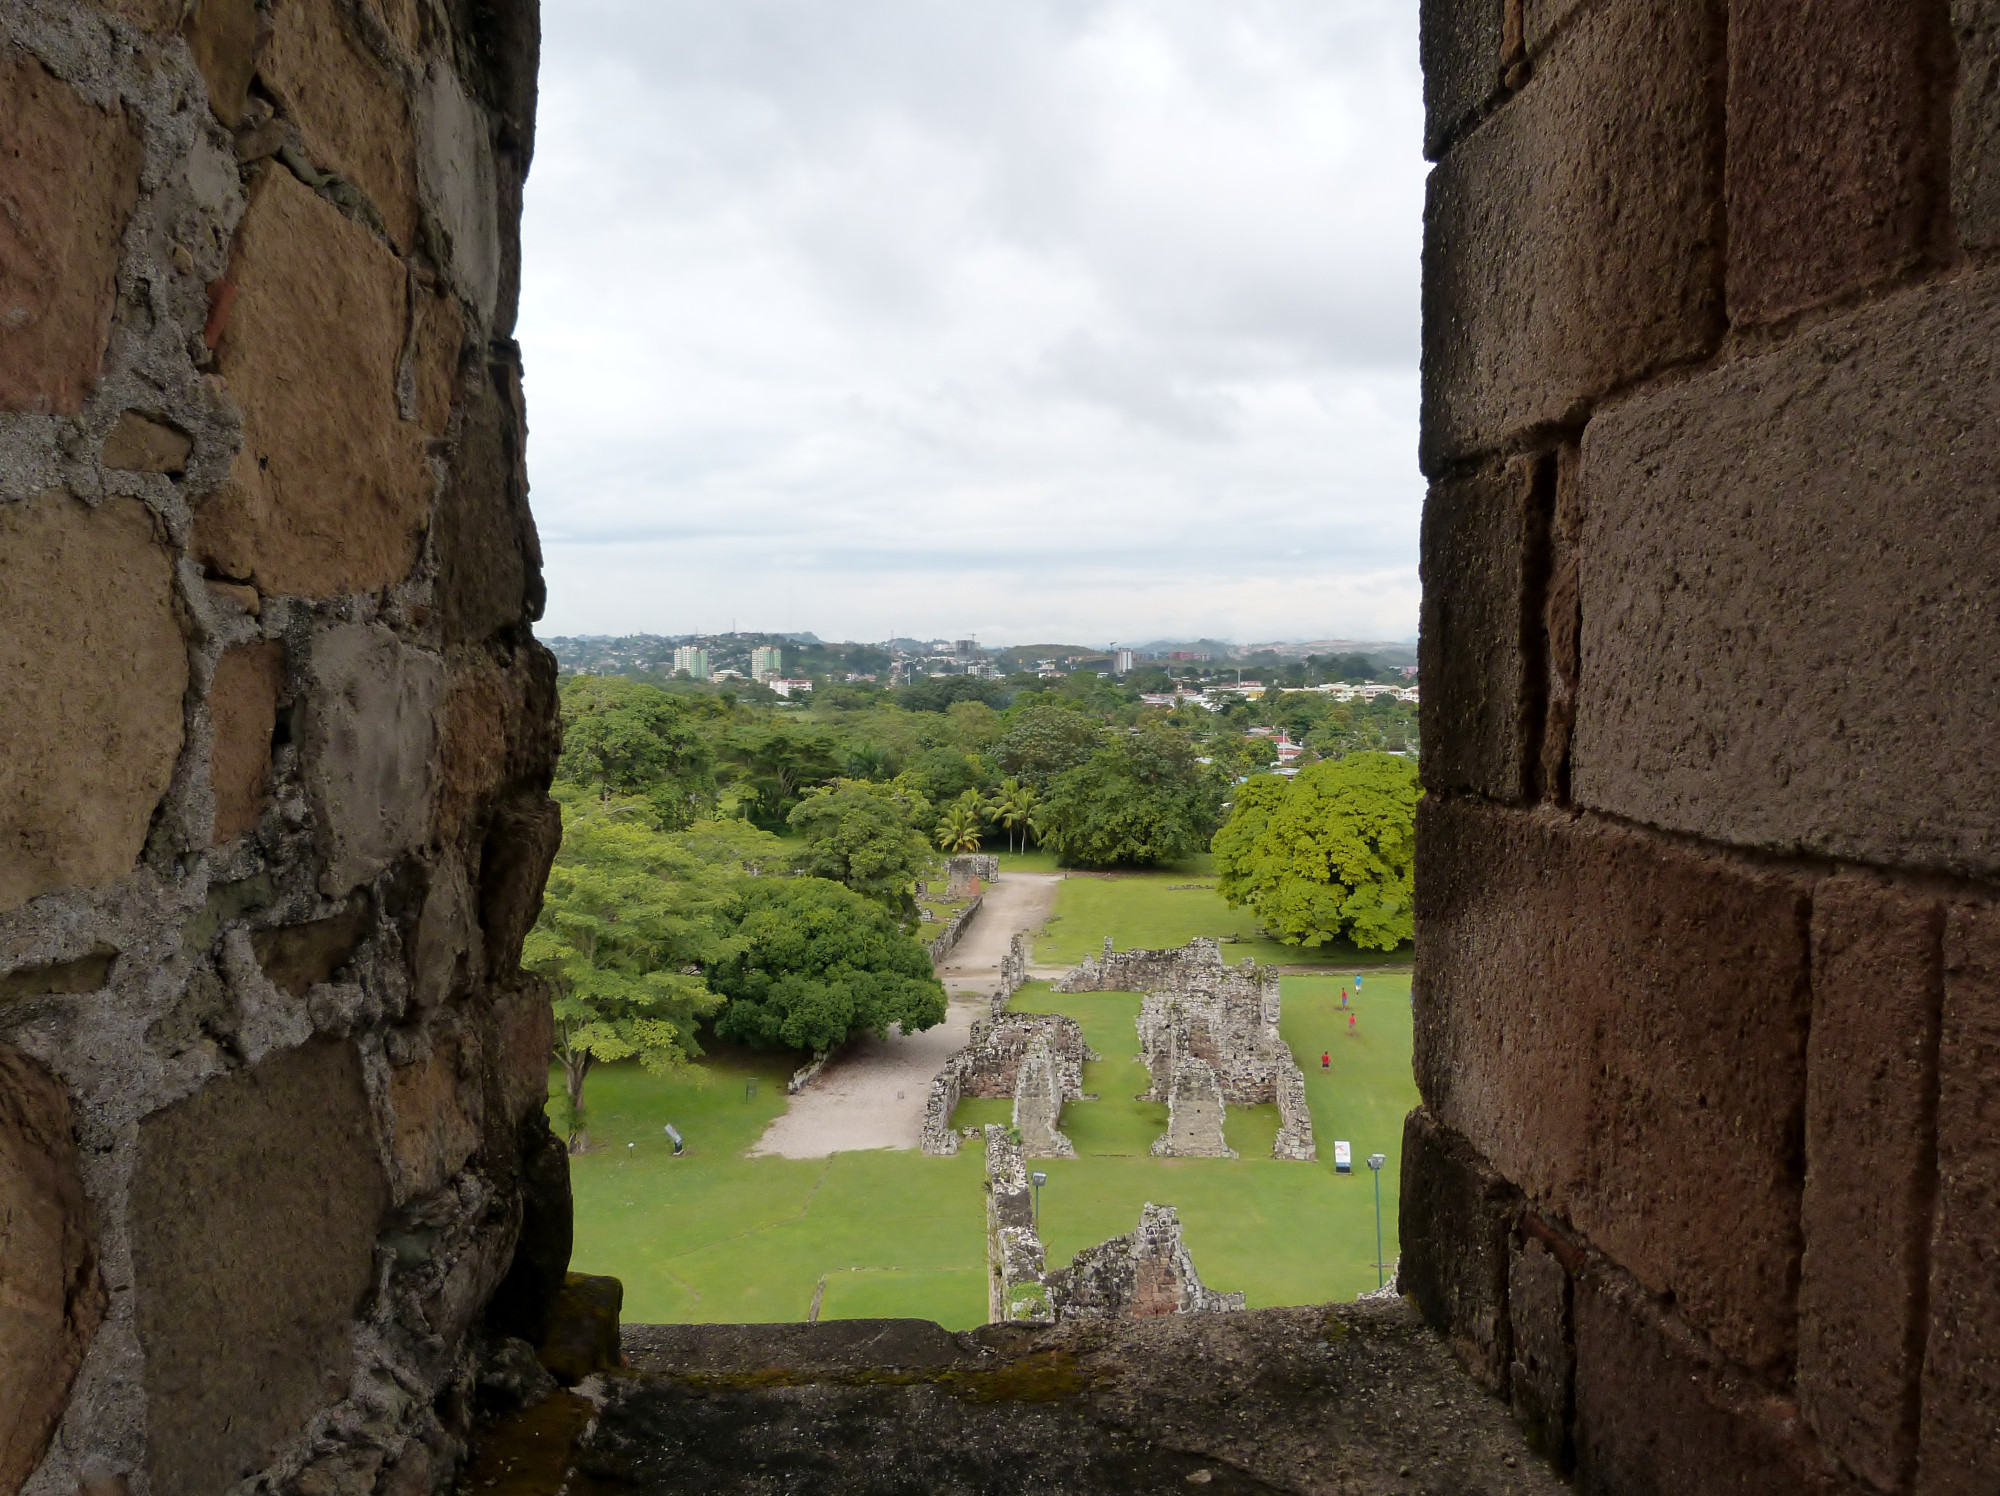 View from the Tower